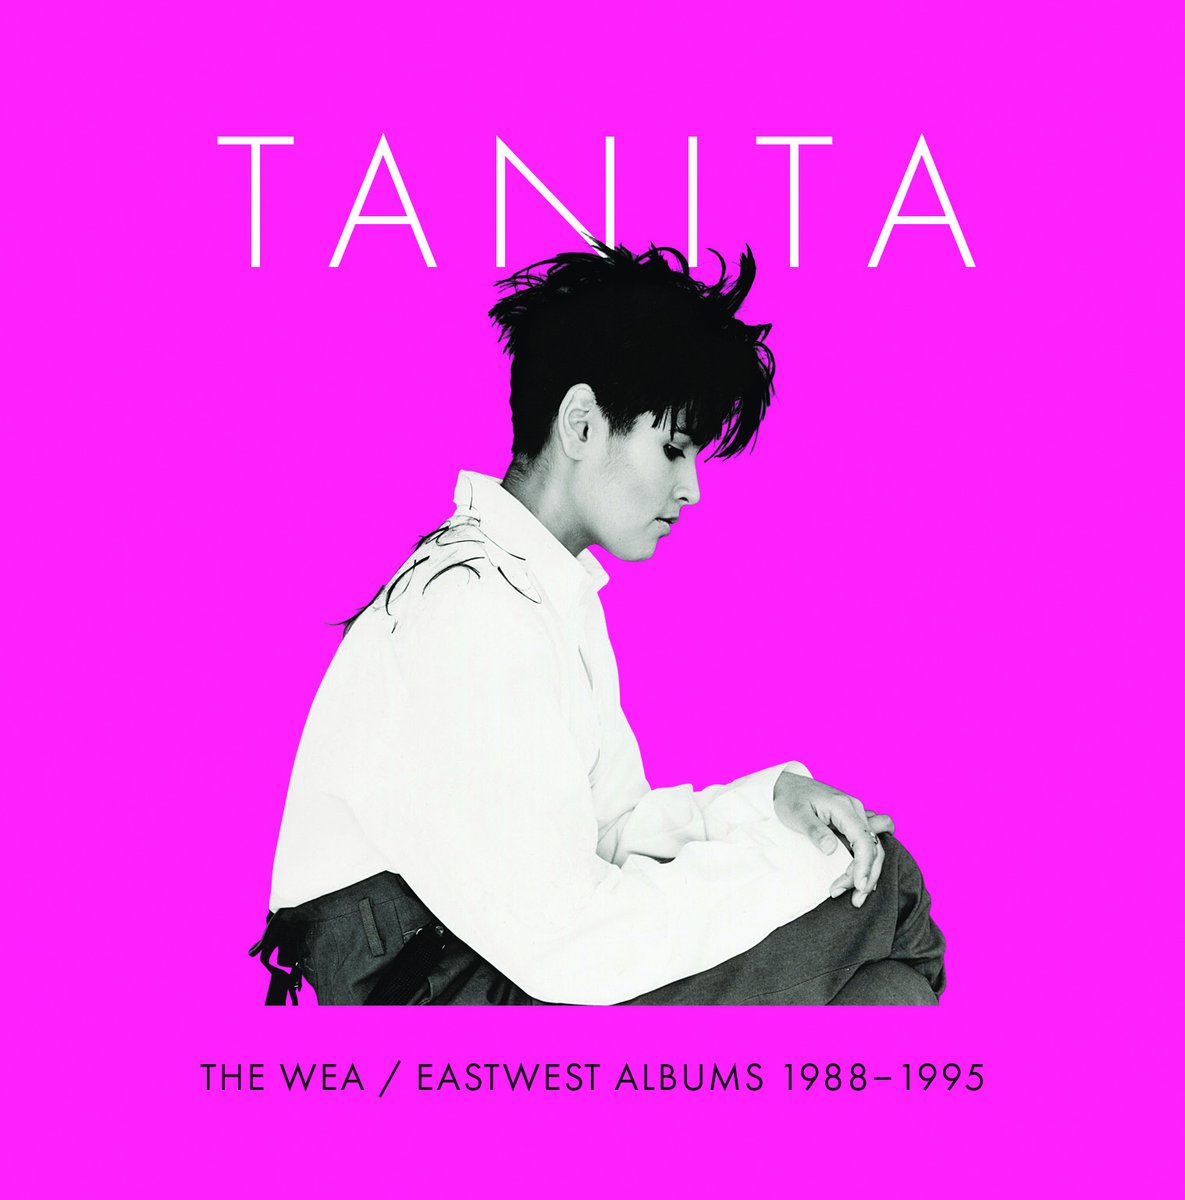 🥳🙌On 28th June #Glastonbury weekend, the ' WEA/East West Albums 1988-1995' 5 albums remastered including my track-by-track annotations, + b-sides, radio edits & original material , rare photos & memorabilia is released ❤️ . Pre-Order 🙏 cherryred.co/TanitaTikaram Love tanita